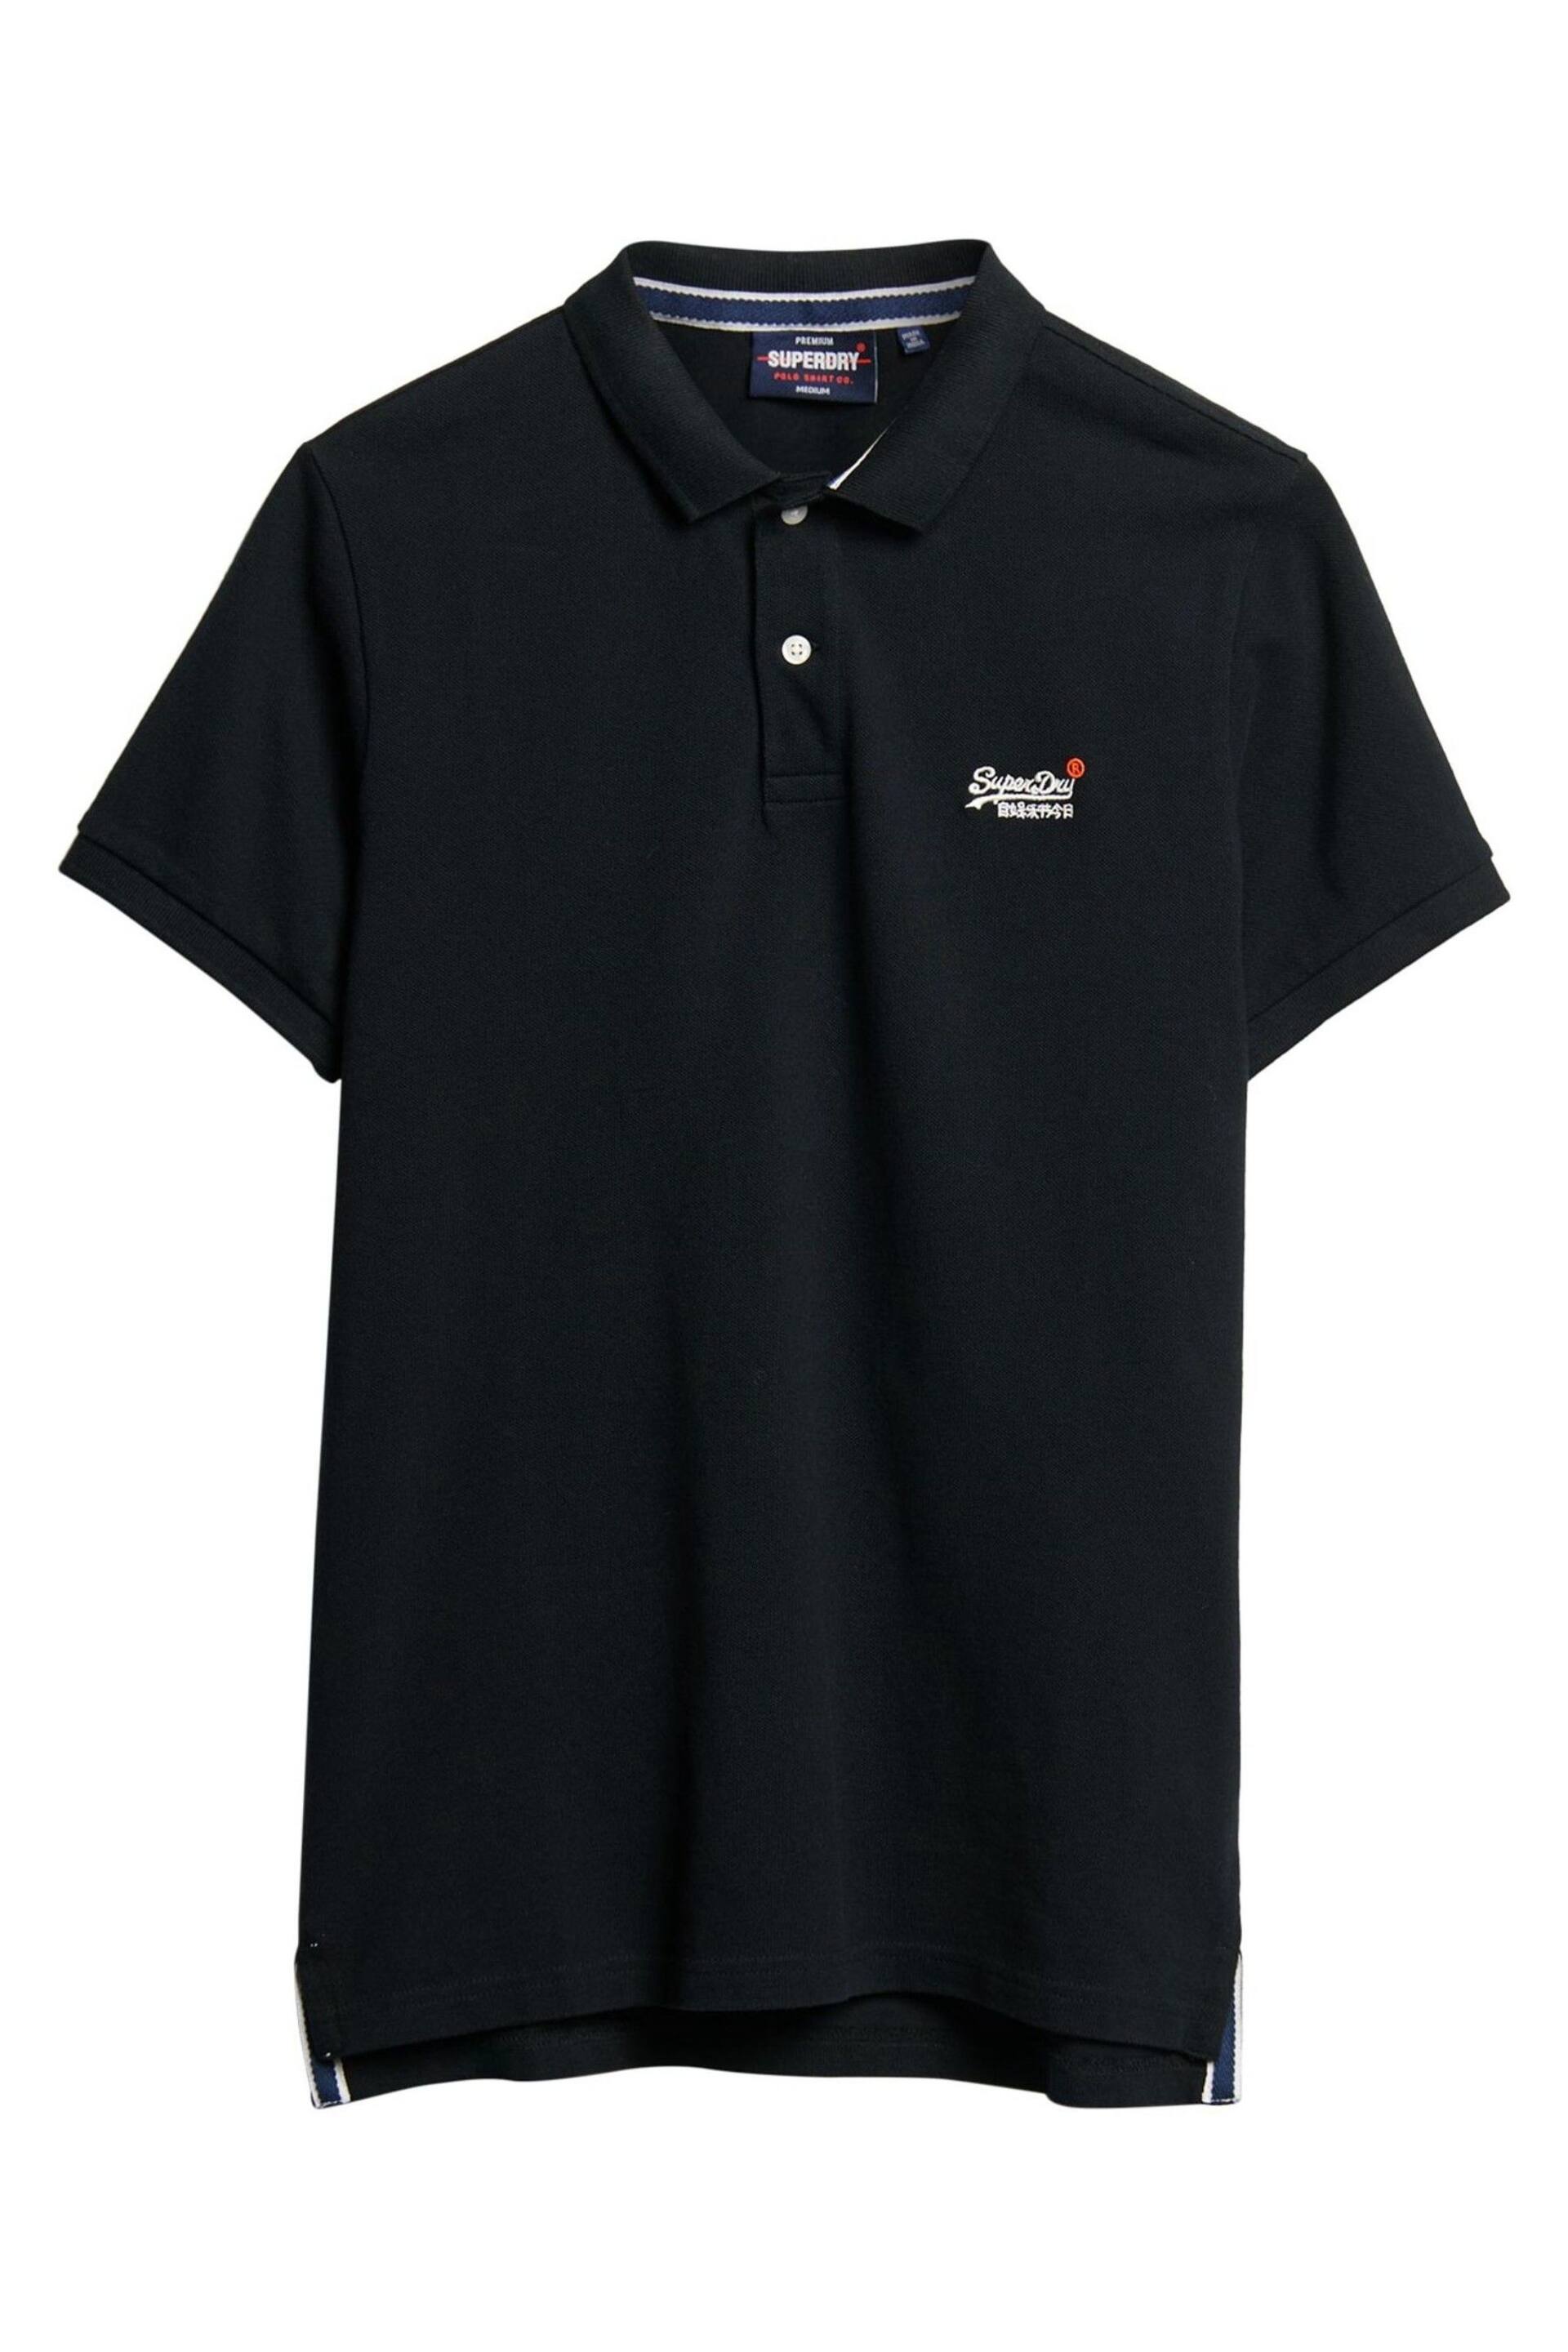 Superdry Black Classic Pique Polo Shirt - Image 6 of 9